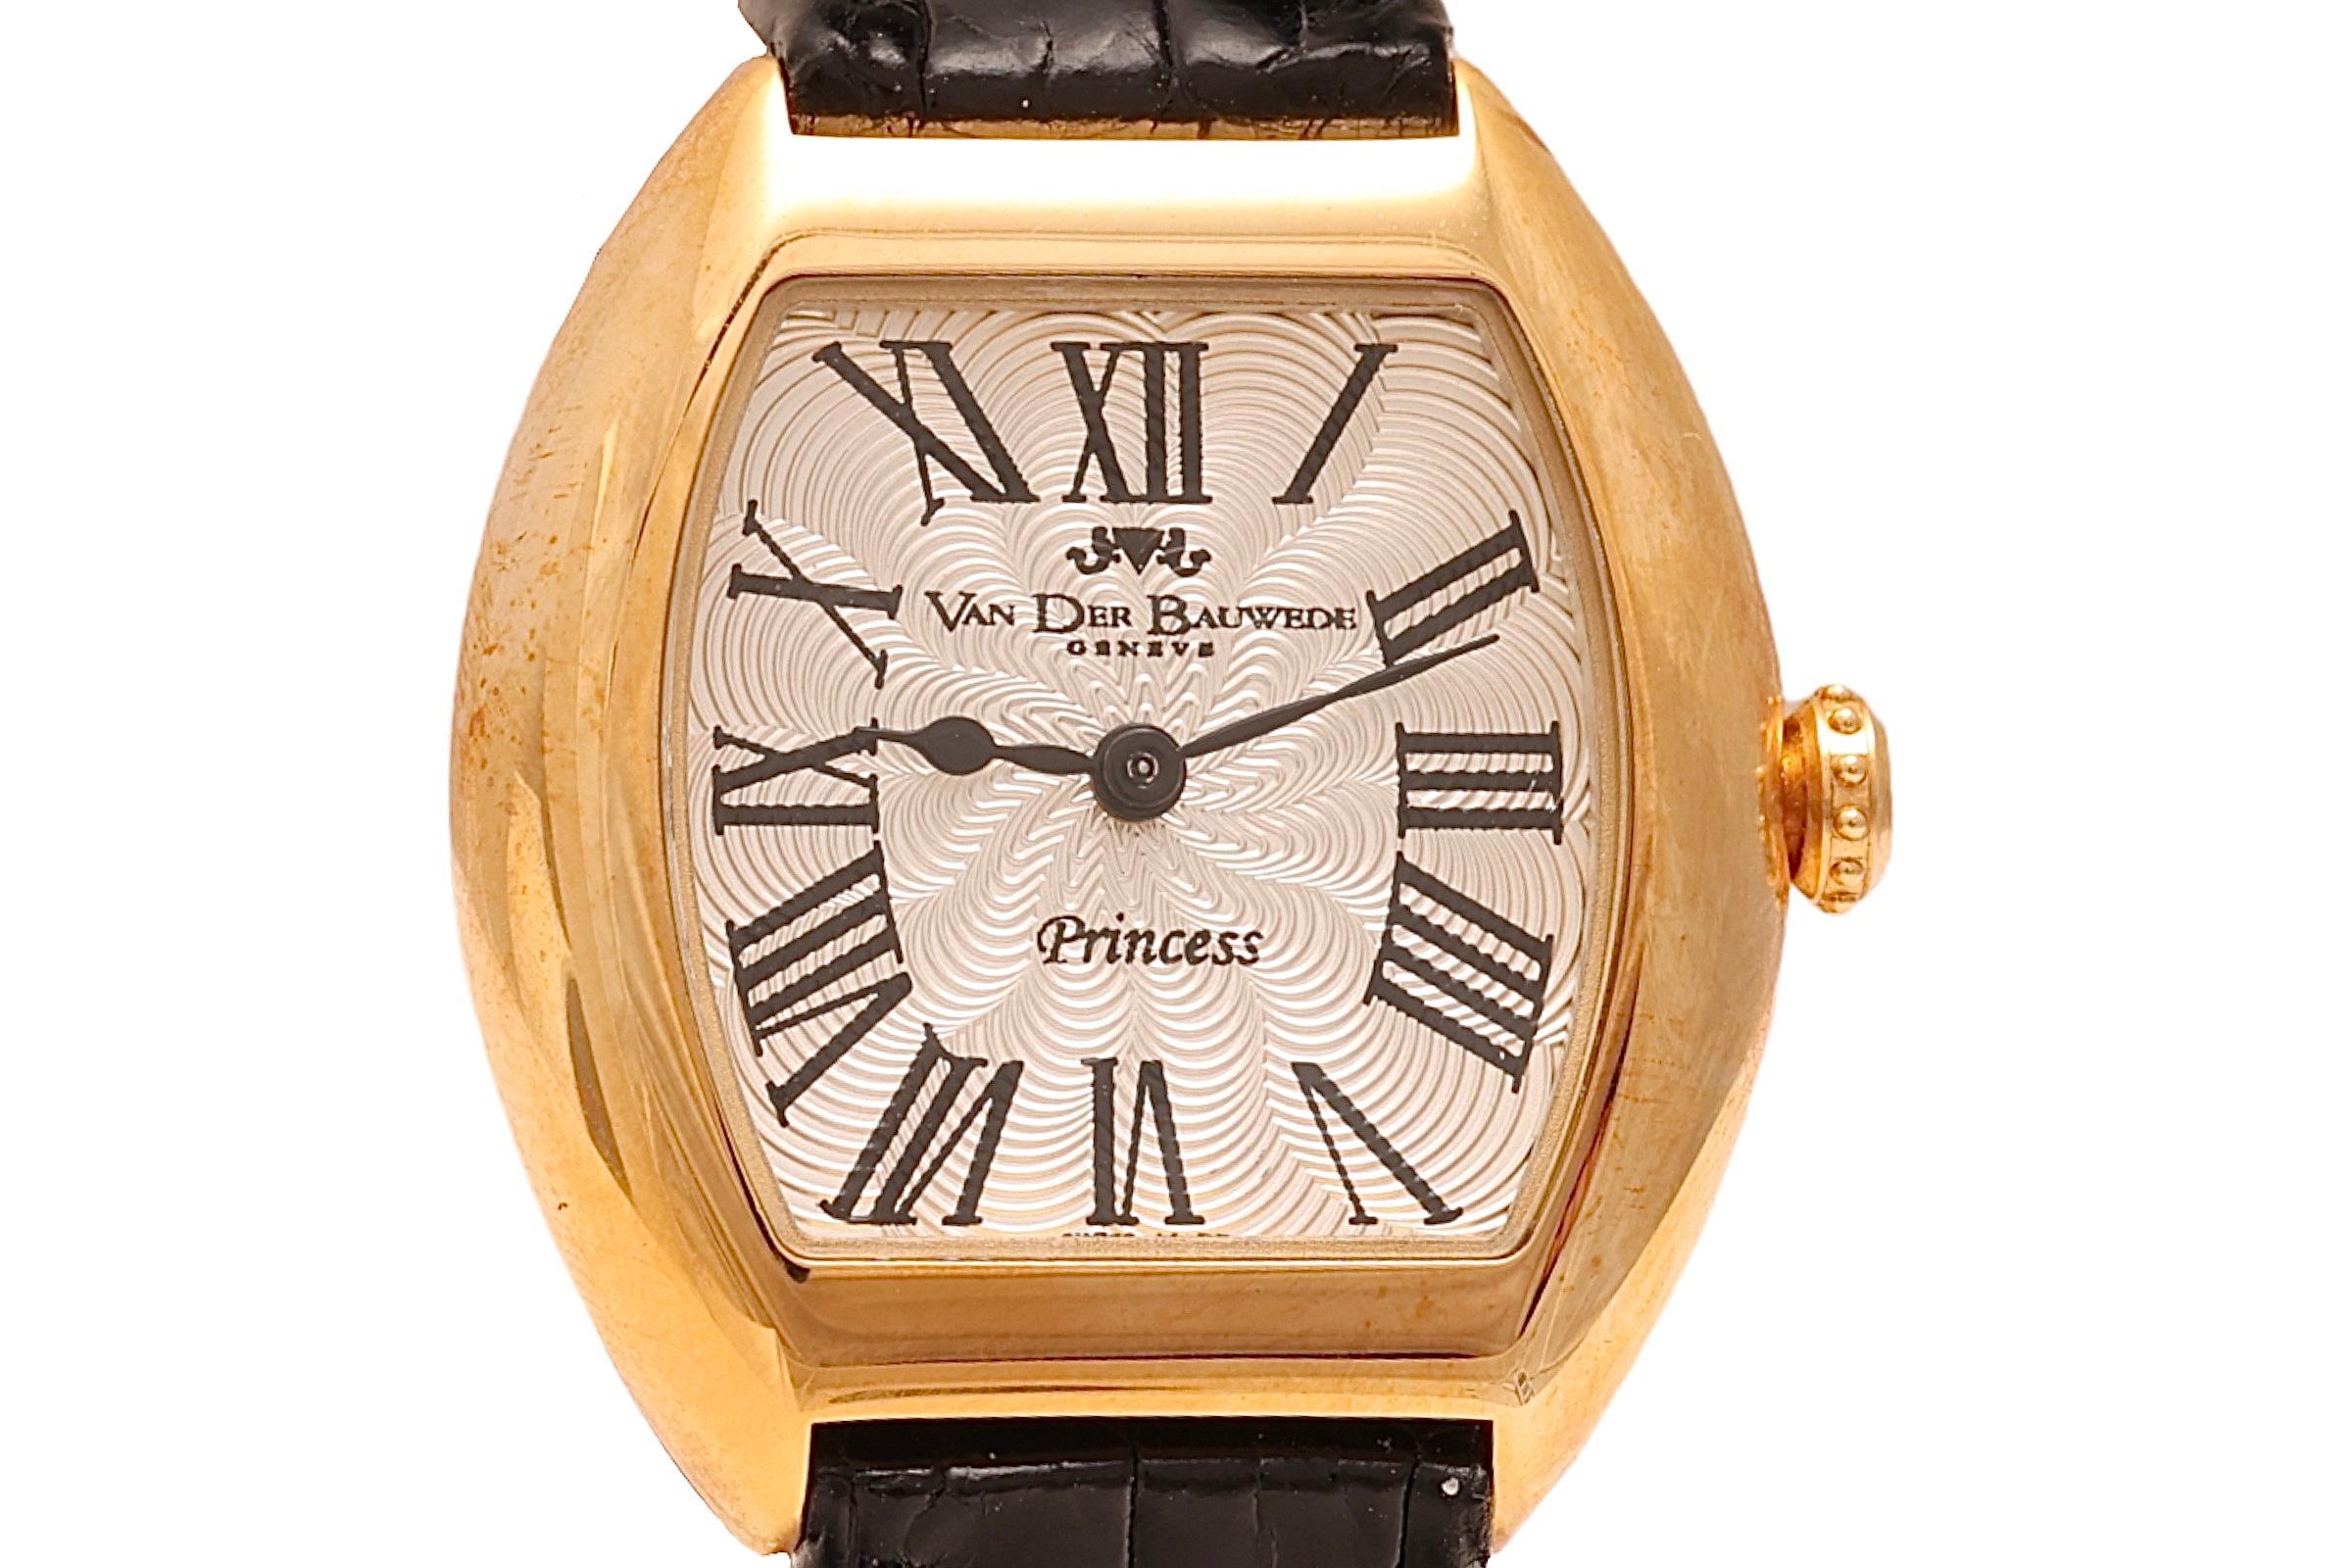 New Van Der Bauwede Princess in 18 kt. Yellow Gold Automatic Wristwatch With Box and Papers

Movement: Automatic

Functions: Hours, minutes

Case: 18 kt. yellow gold, diameter 27 mm x 29 mm, height 8.5 mm, sapphire glass, see through back, back